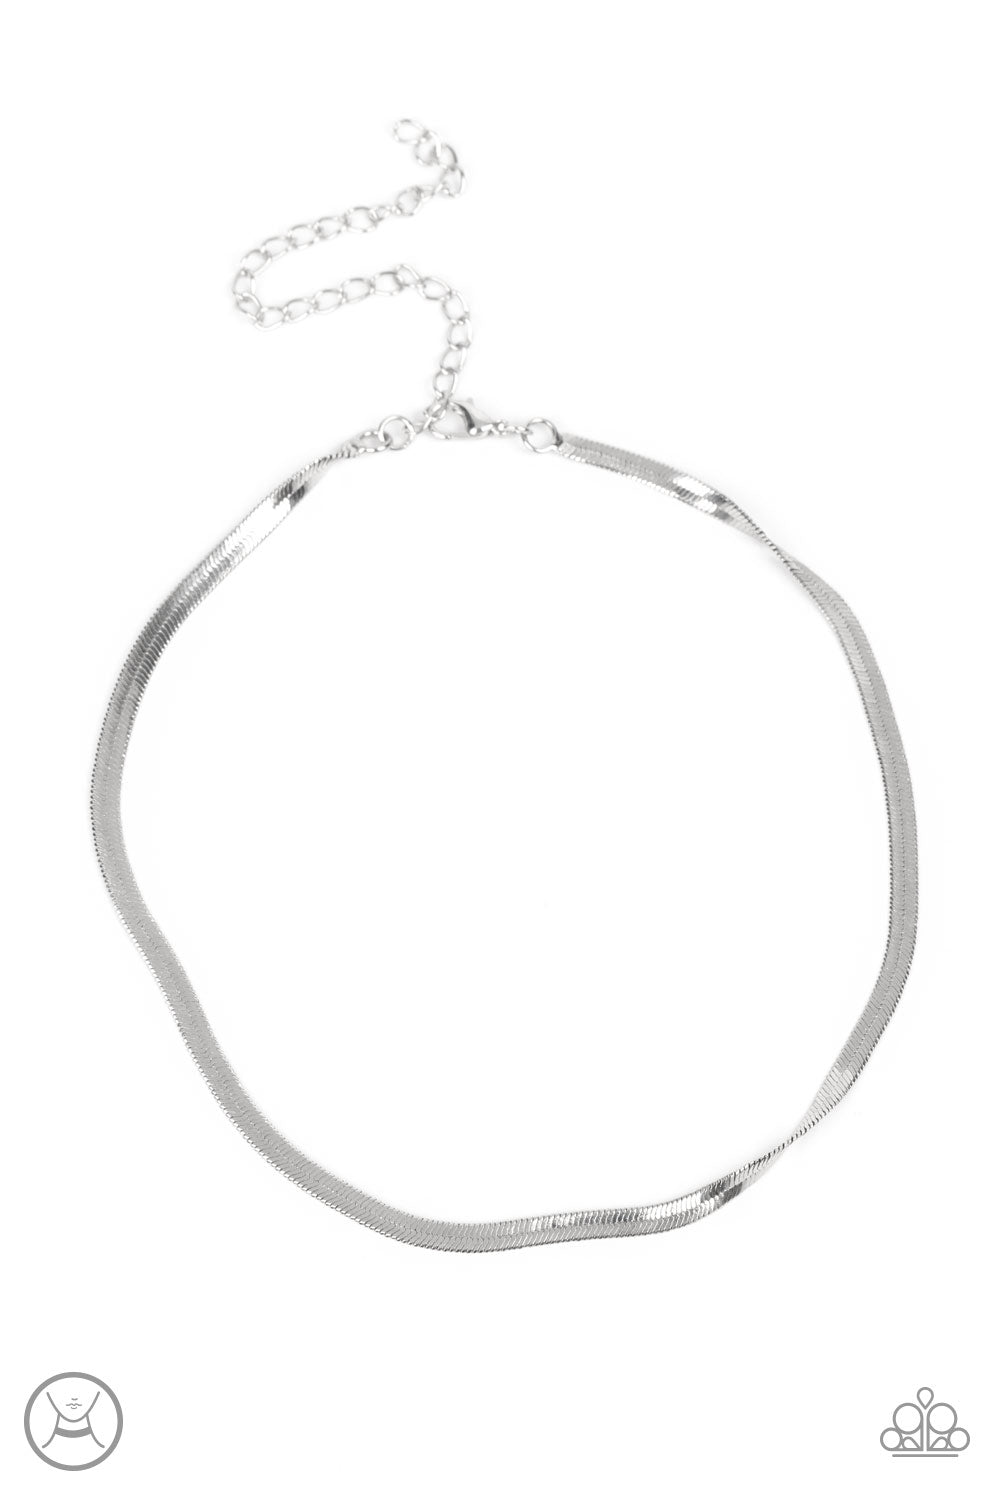 In No Time Flat - Silver Necklace